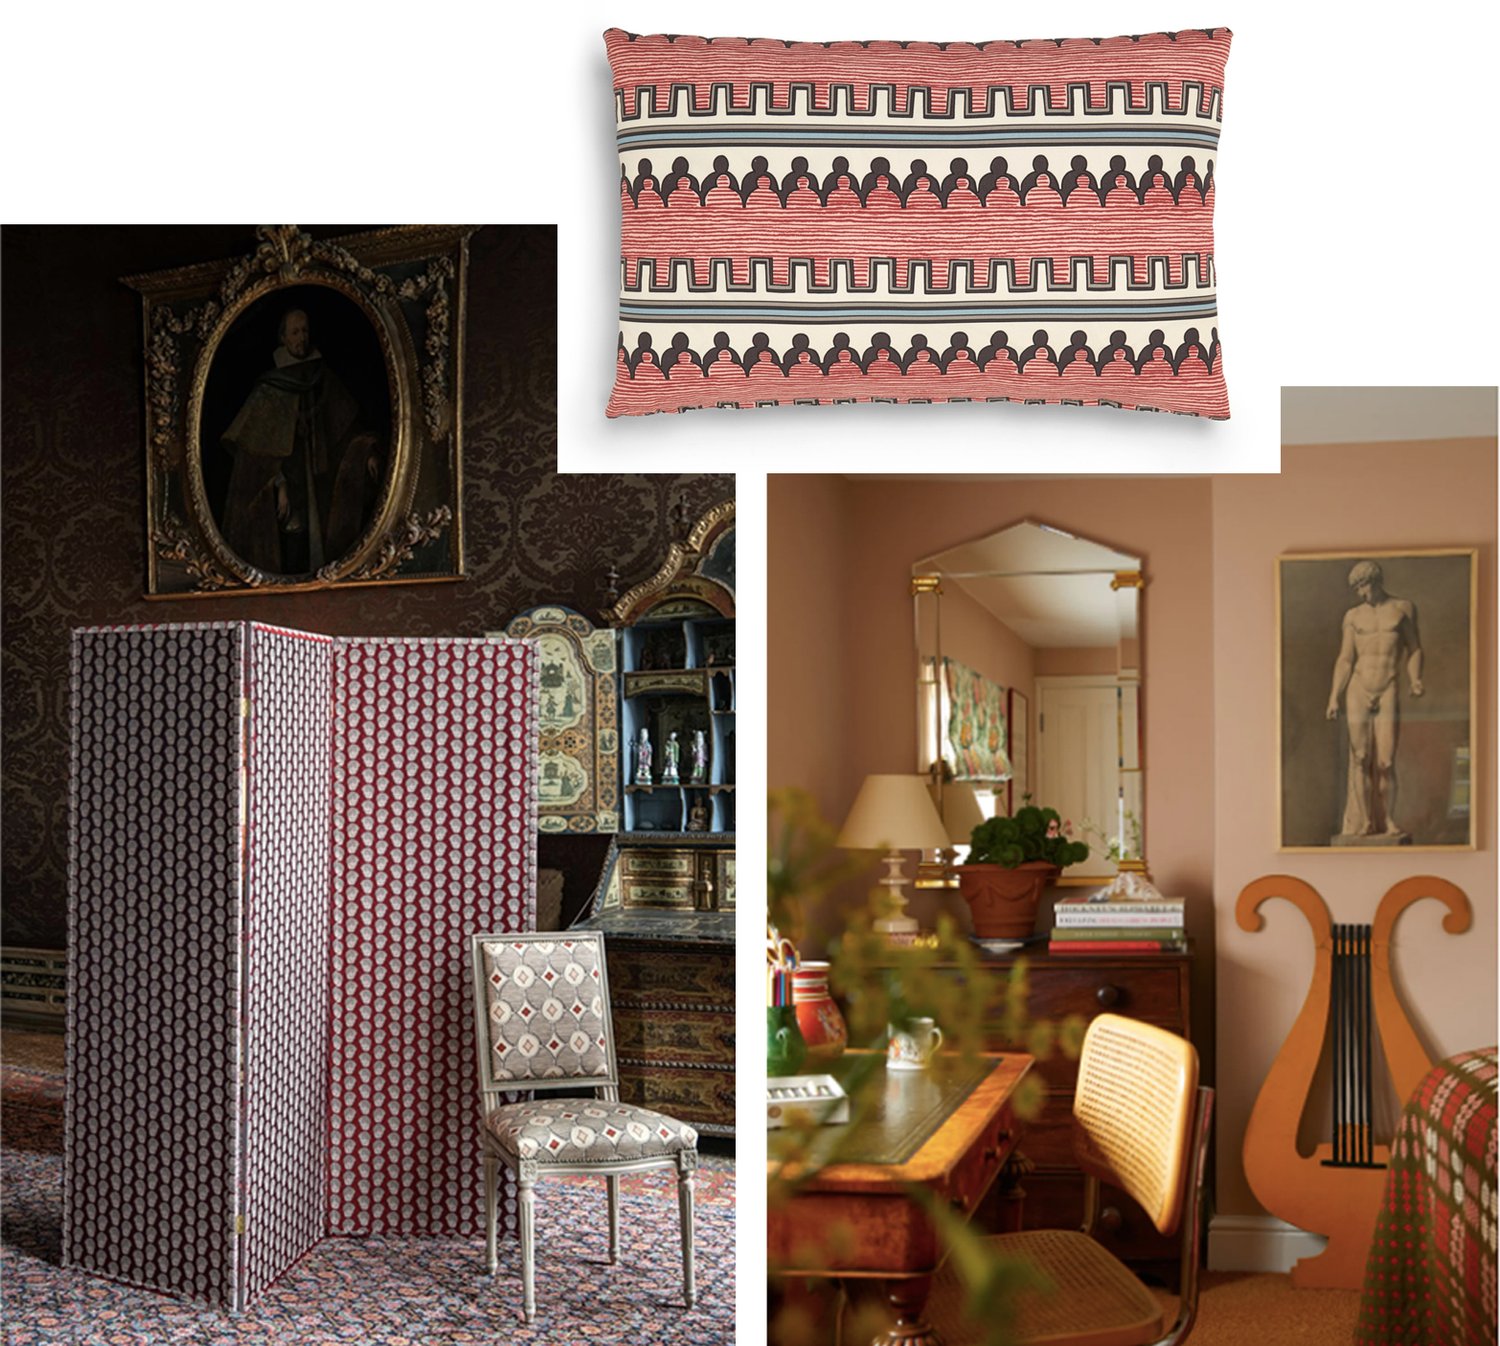 Three images: One on left of a textured screen in ornate room. Second of a bedroom with decorative accessories. Third is an inset of a throw pillow with graphic pattern.